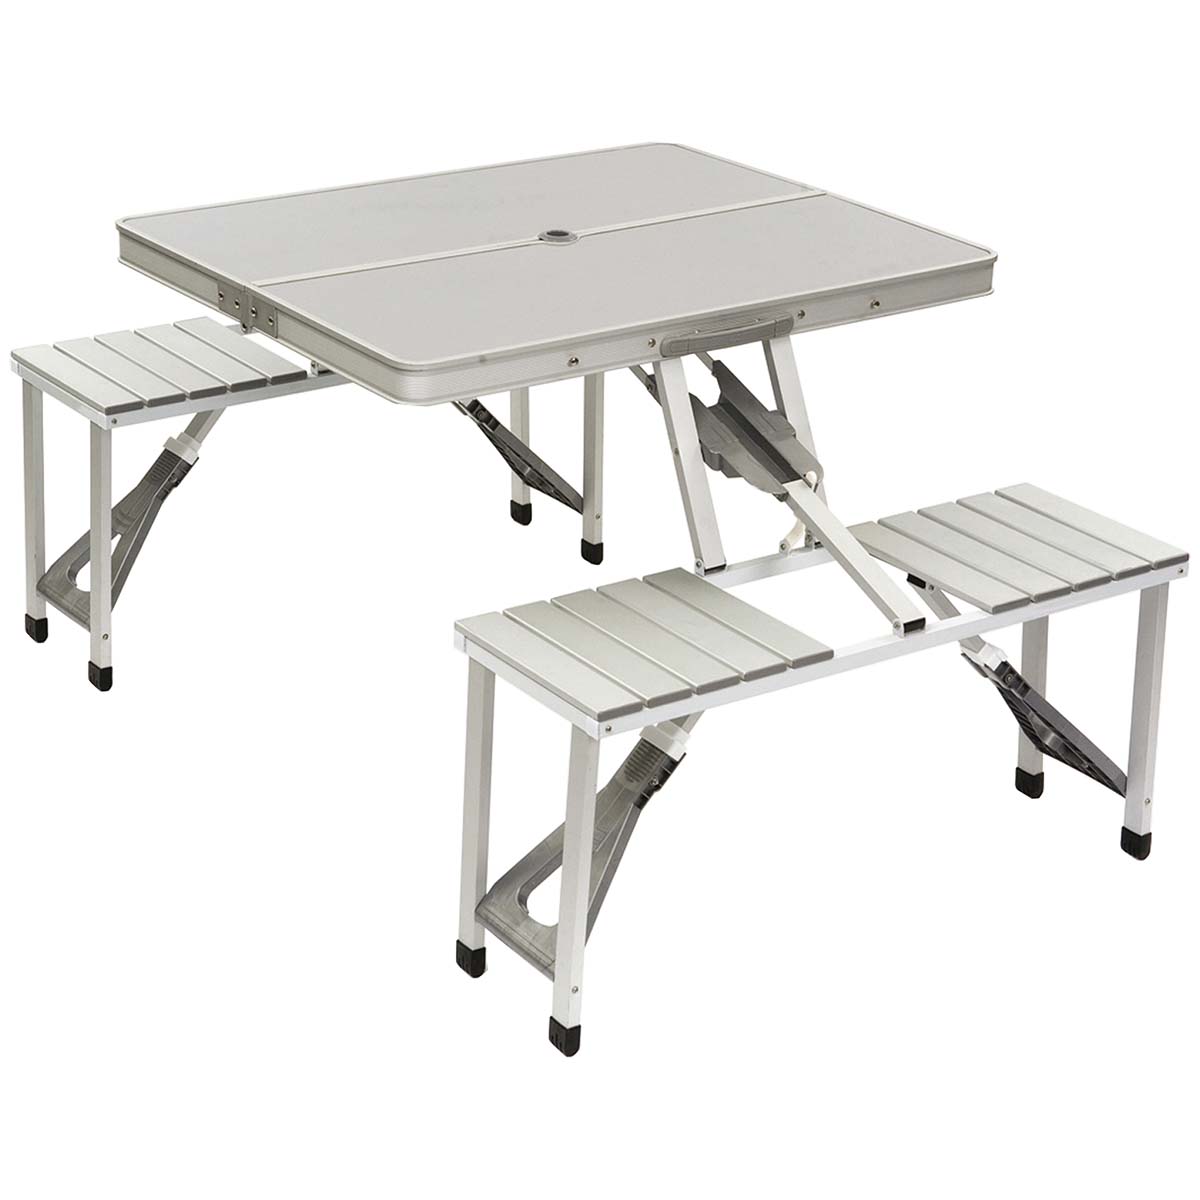 1404579 A practical picnic table. Very compact to fold into a suitcase (lxwxh: 85.5x67x11 cm). This family table has 4 seats. In addition, the table is equipped with a folding protection and is made of lightweight, waterproof and heat-resistant aluminum.